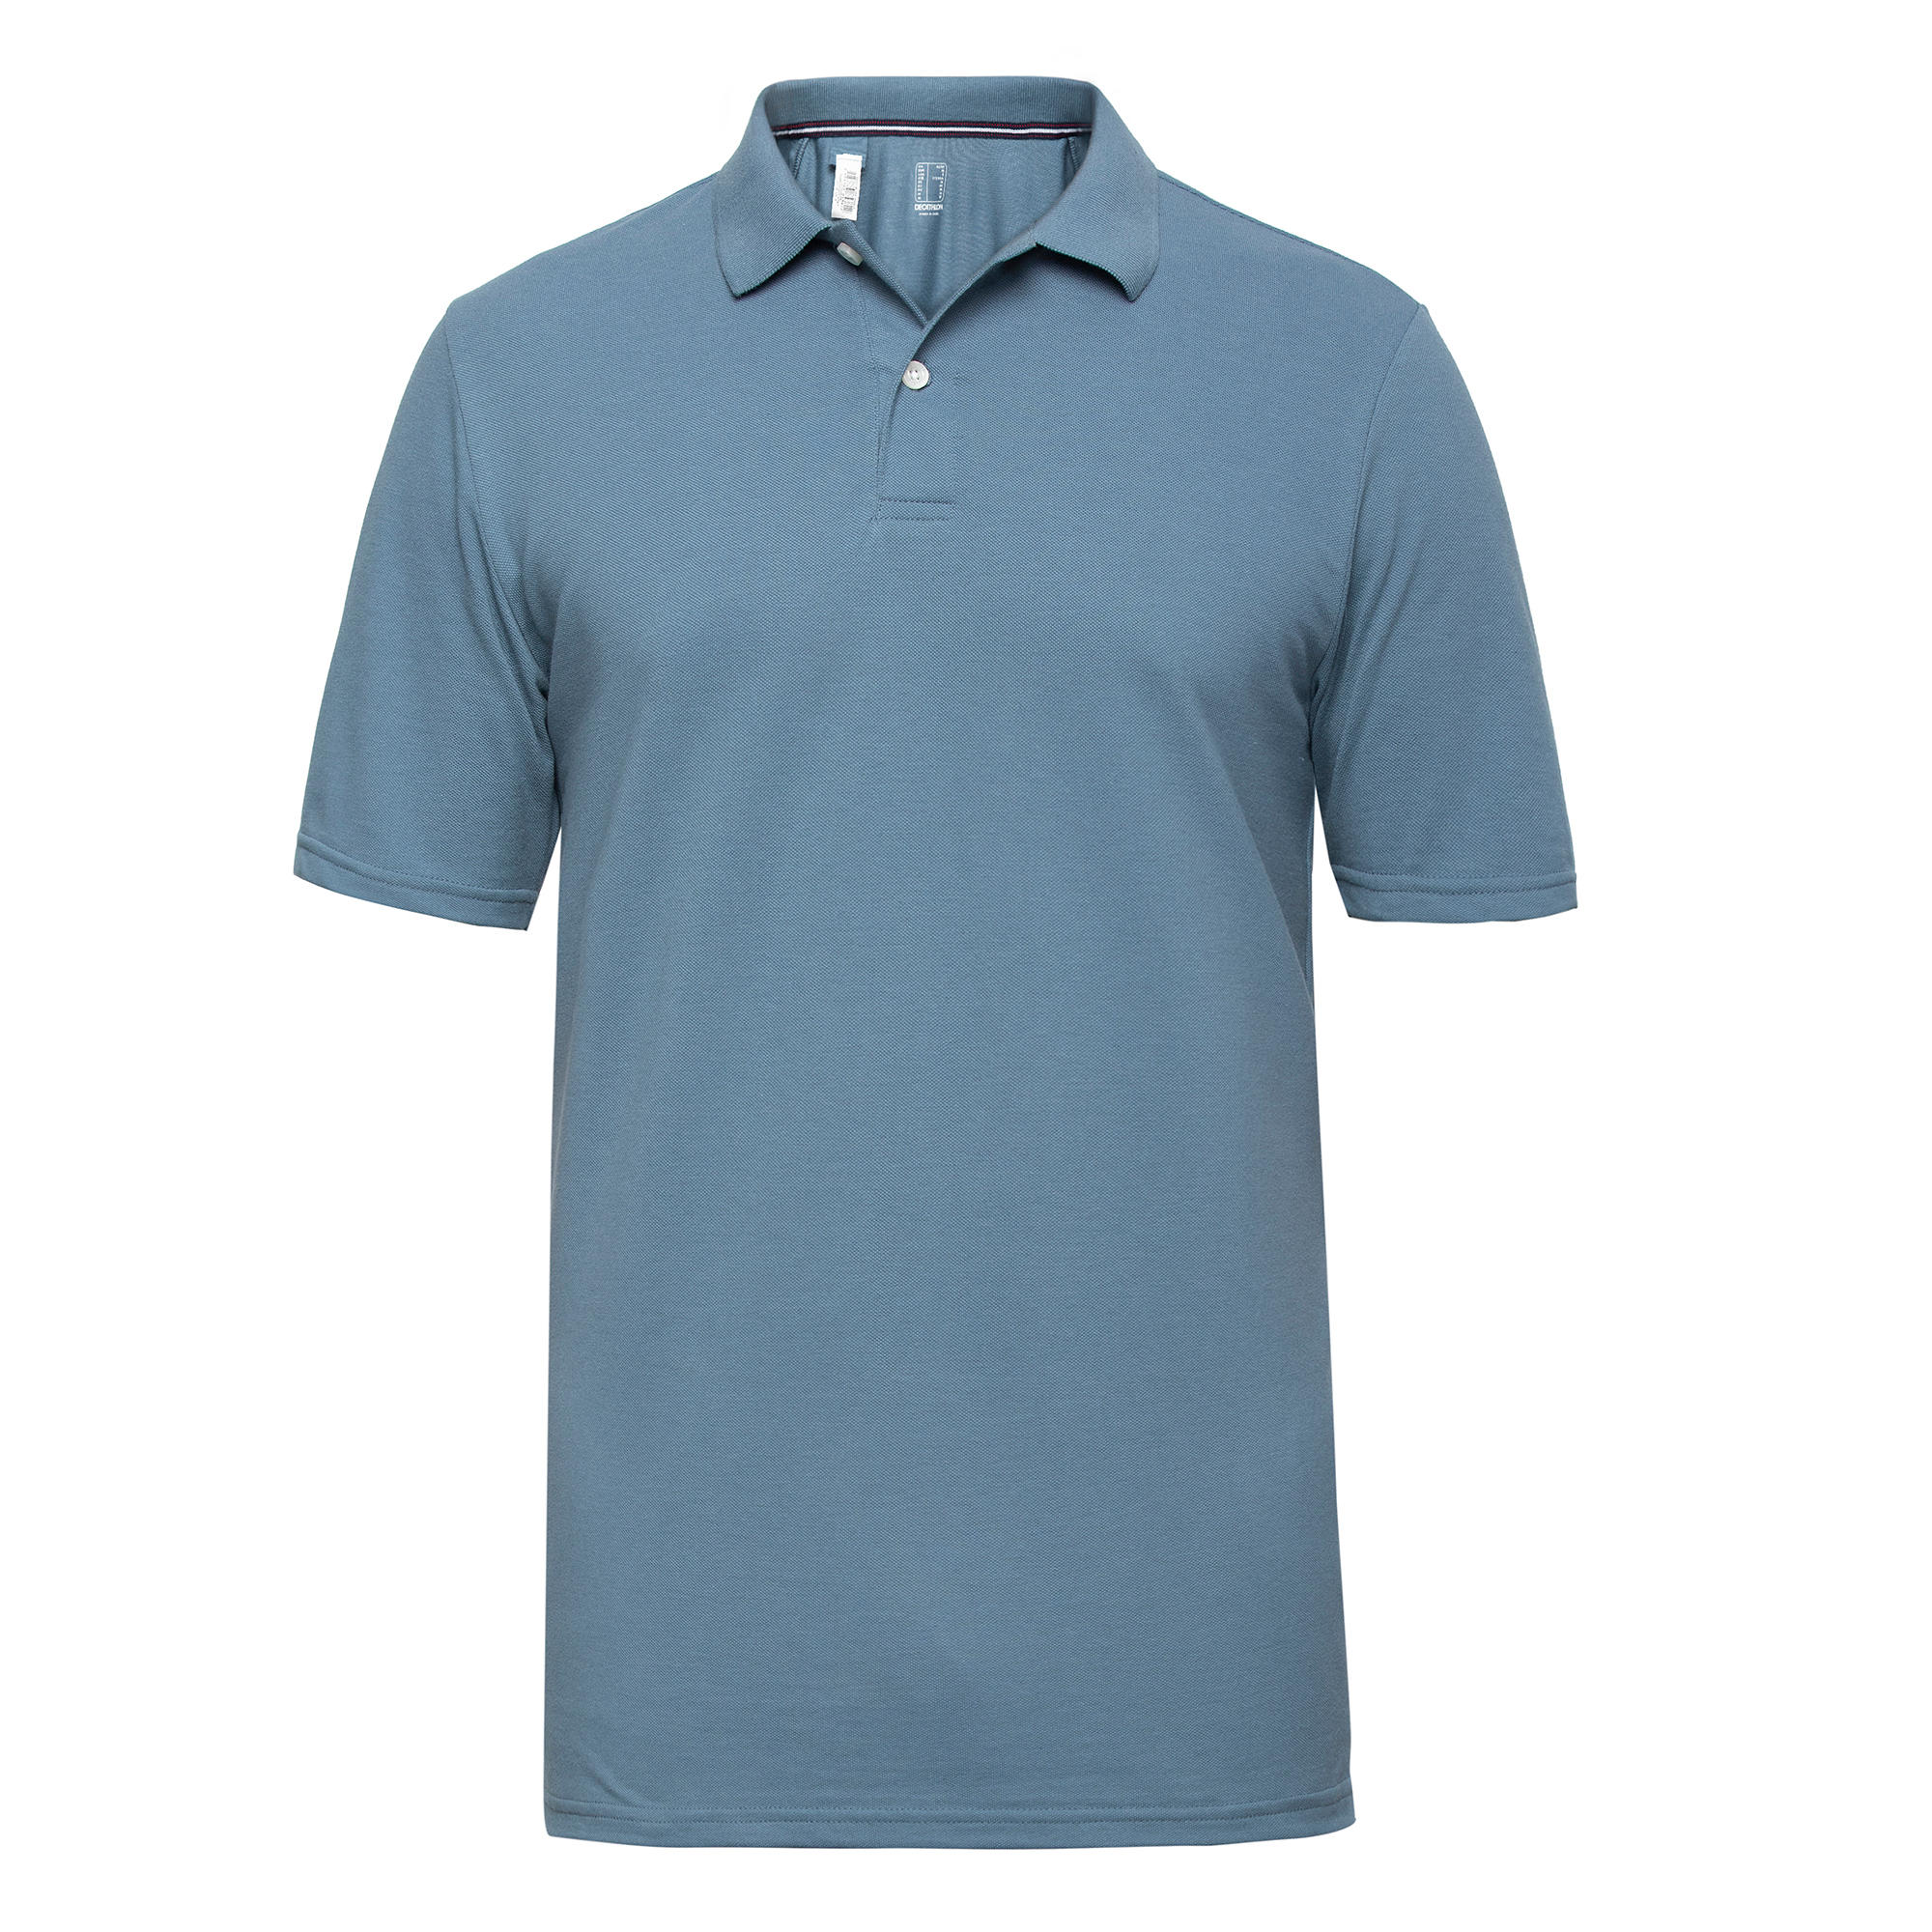 Polo T-Shirts - Buy Polo T-Shirts for 